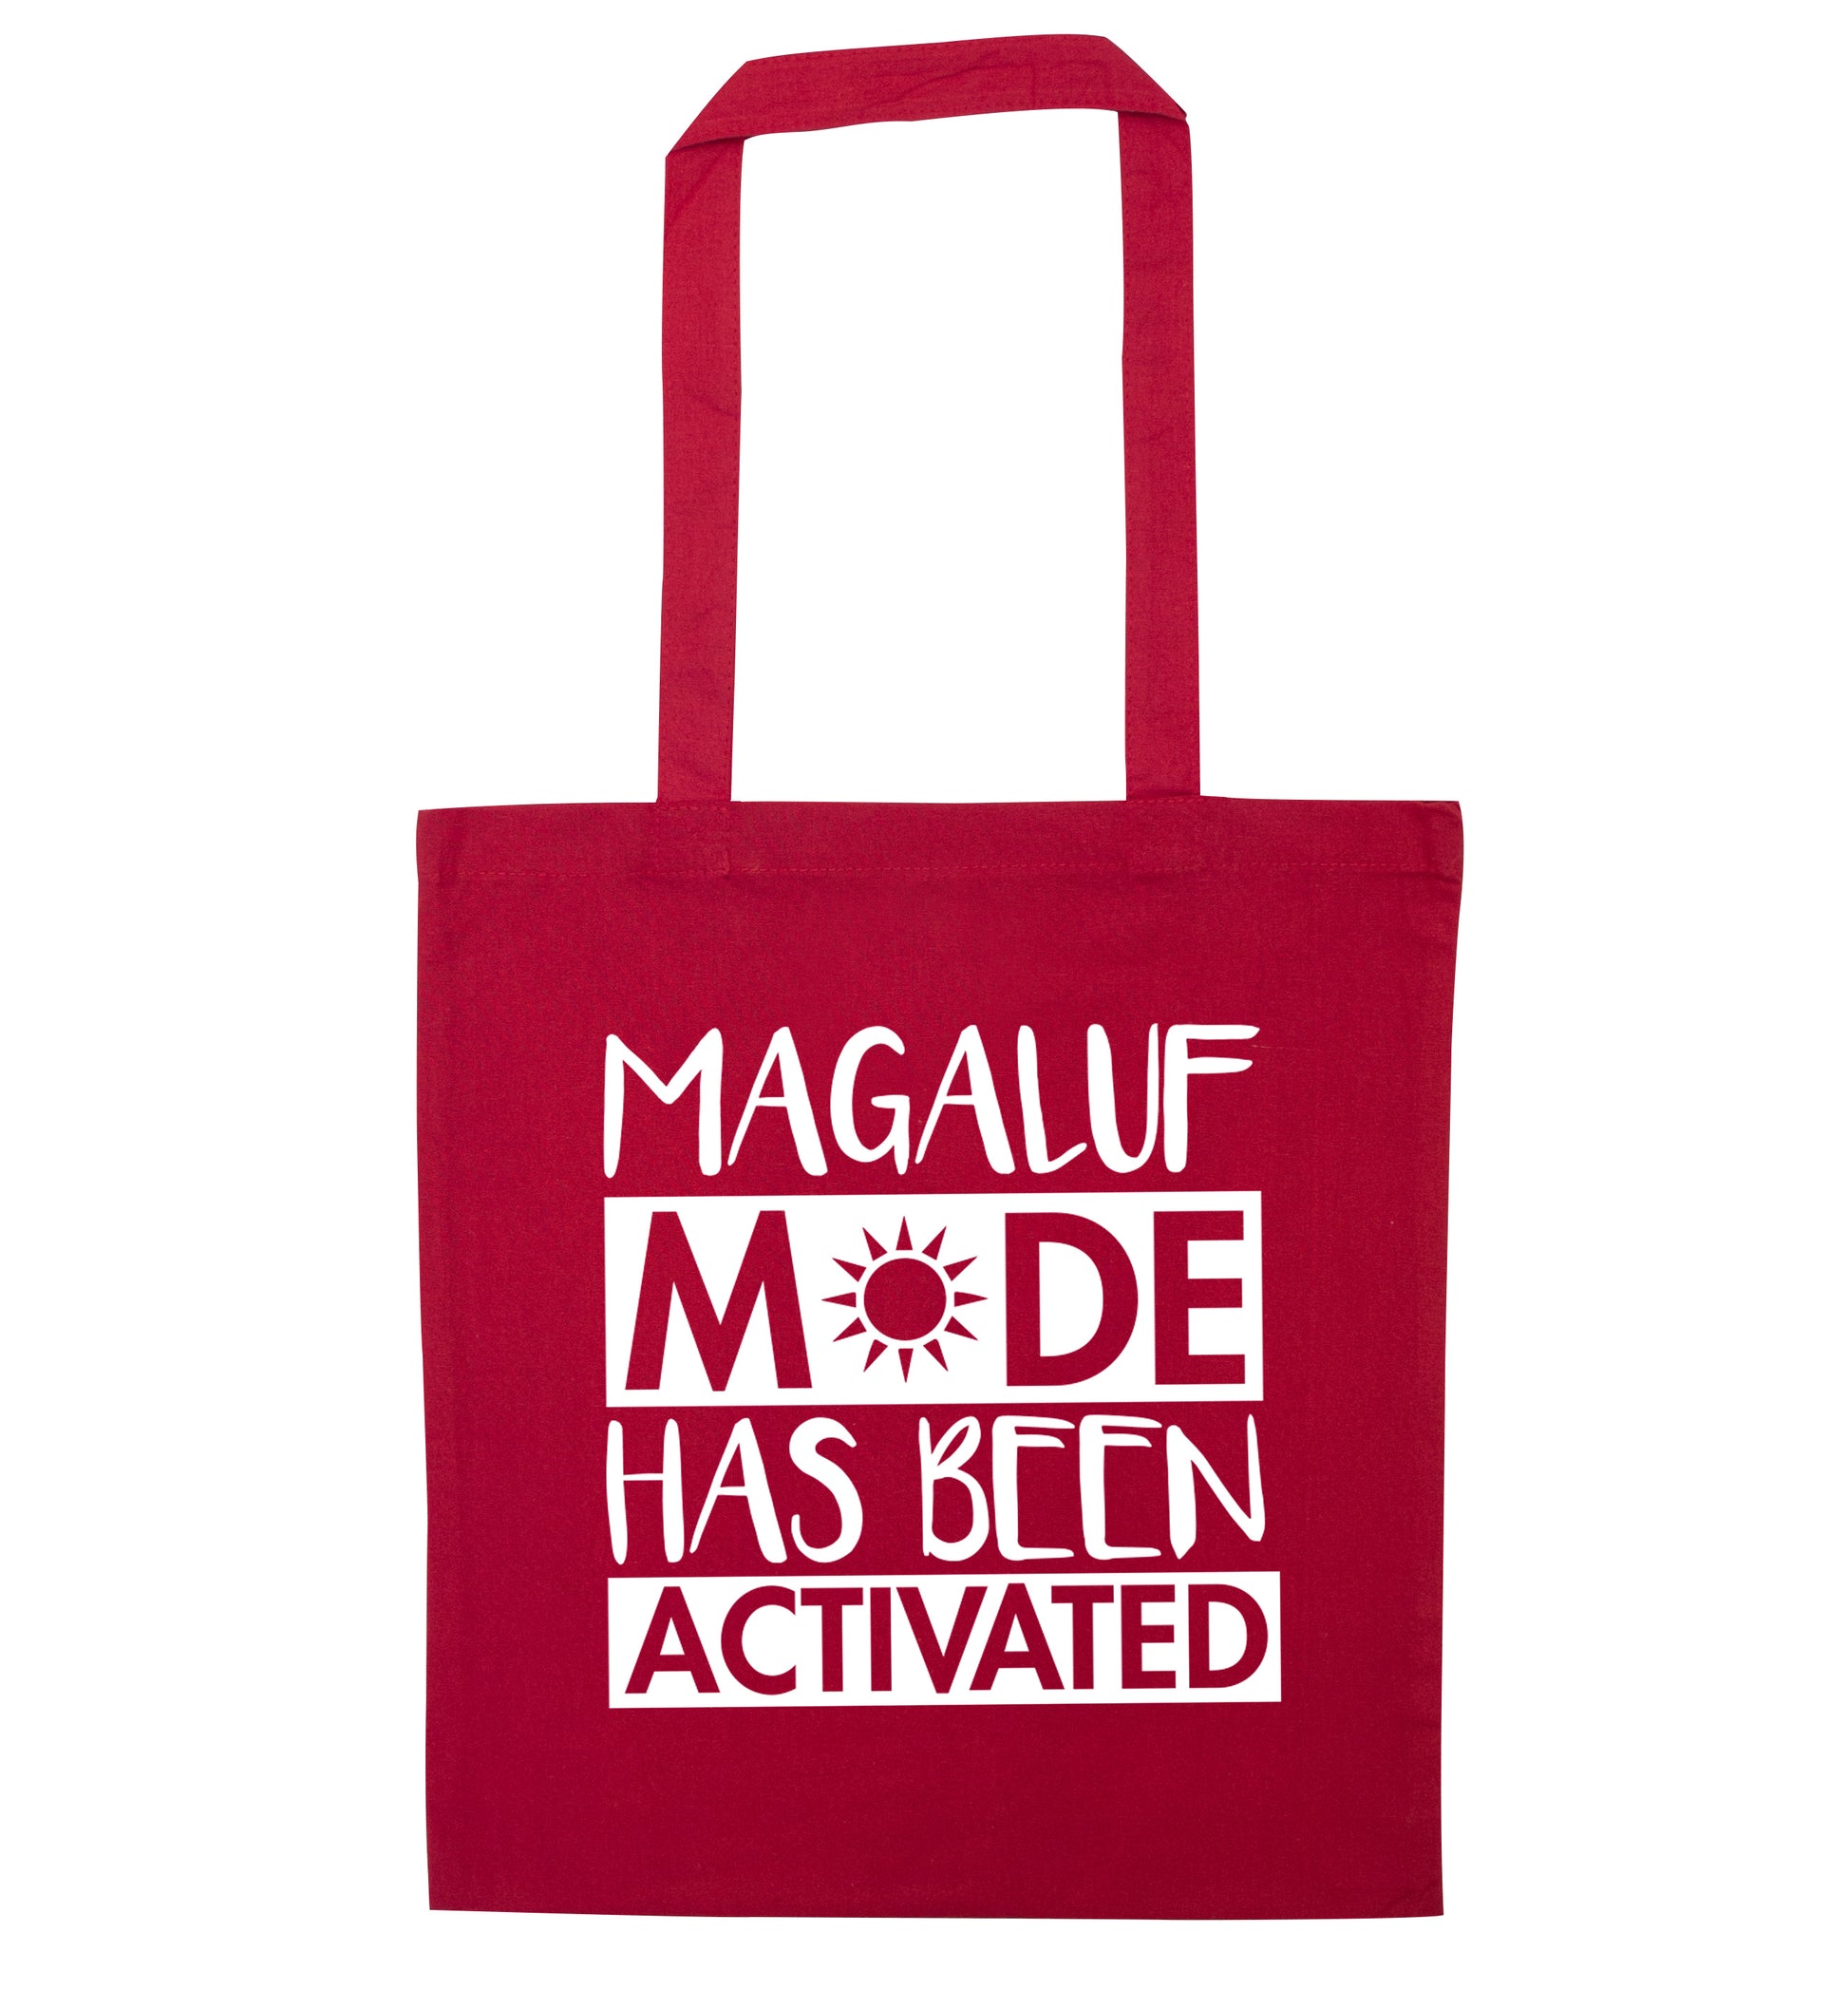 Magaluf mode has been activated red tote bag